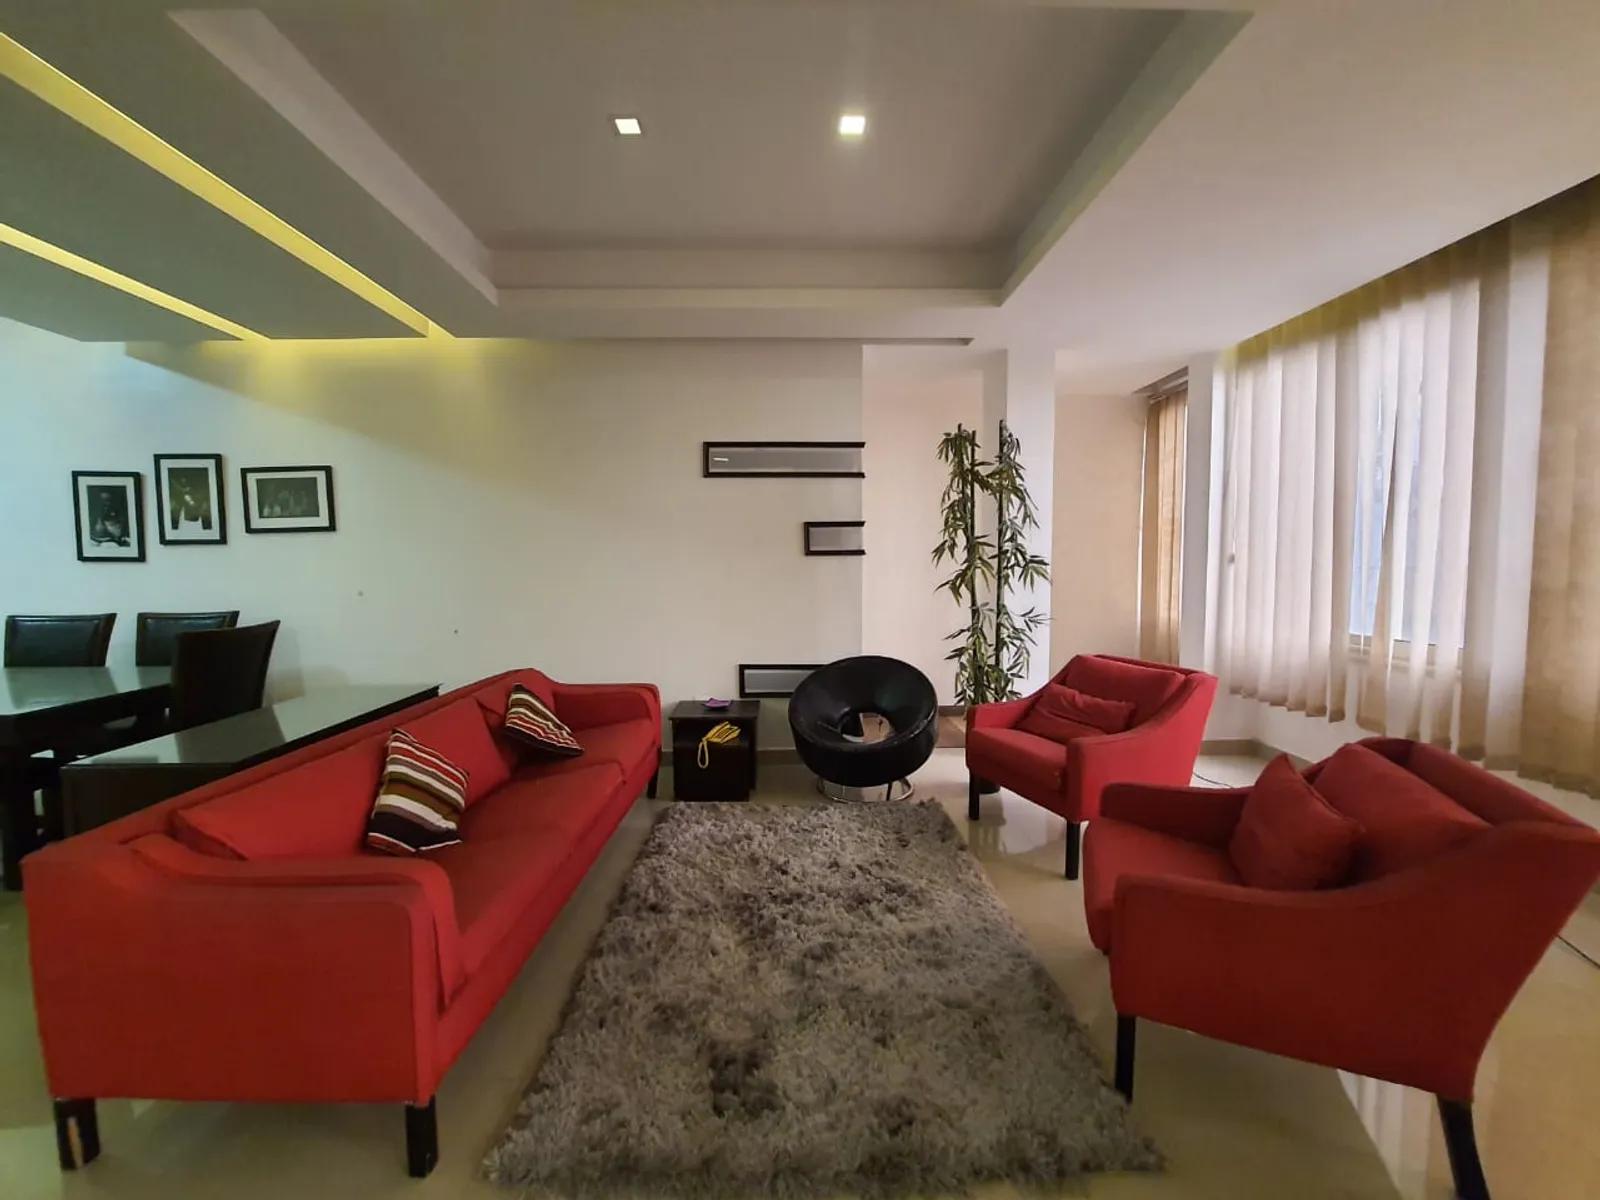 RECEPTION  @ Apartments For Rent In Maadi Maadi Sarayat Area: 220 m² consists of 3 Bedrooms 2 Bathrooms Modern furnished 5 stars #3432-2